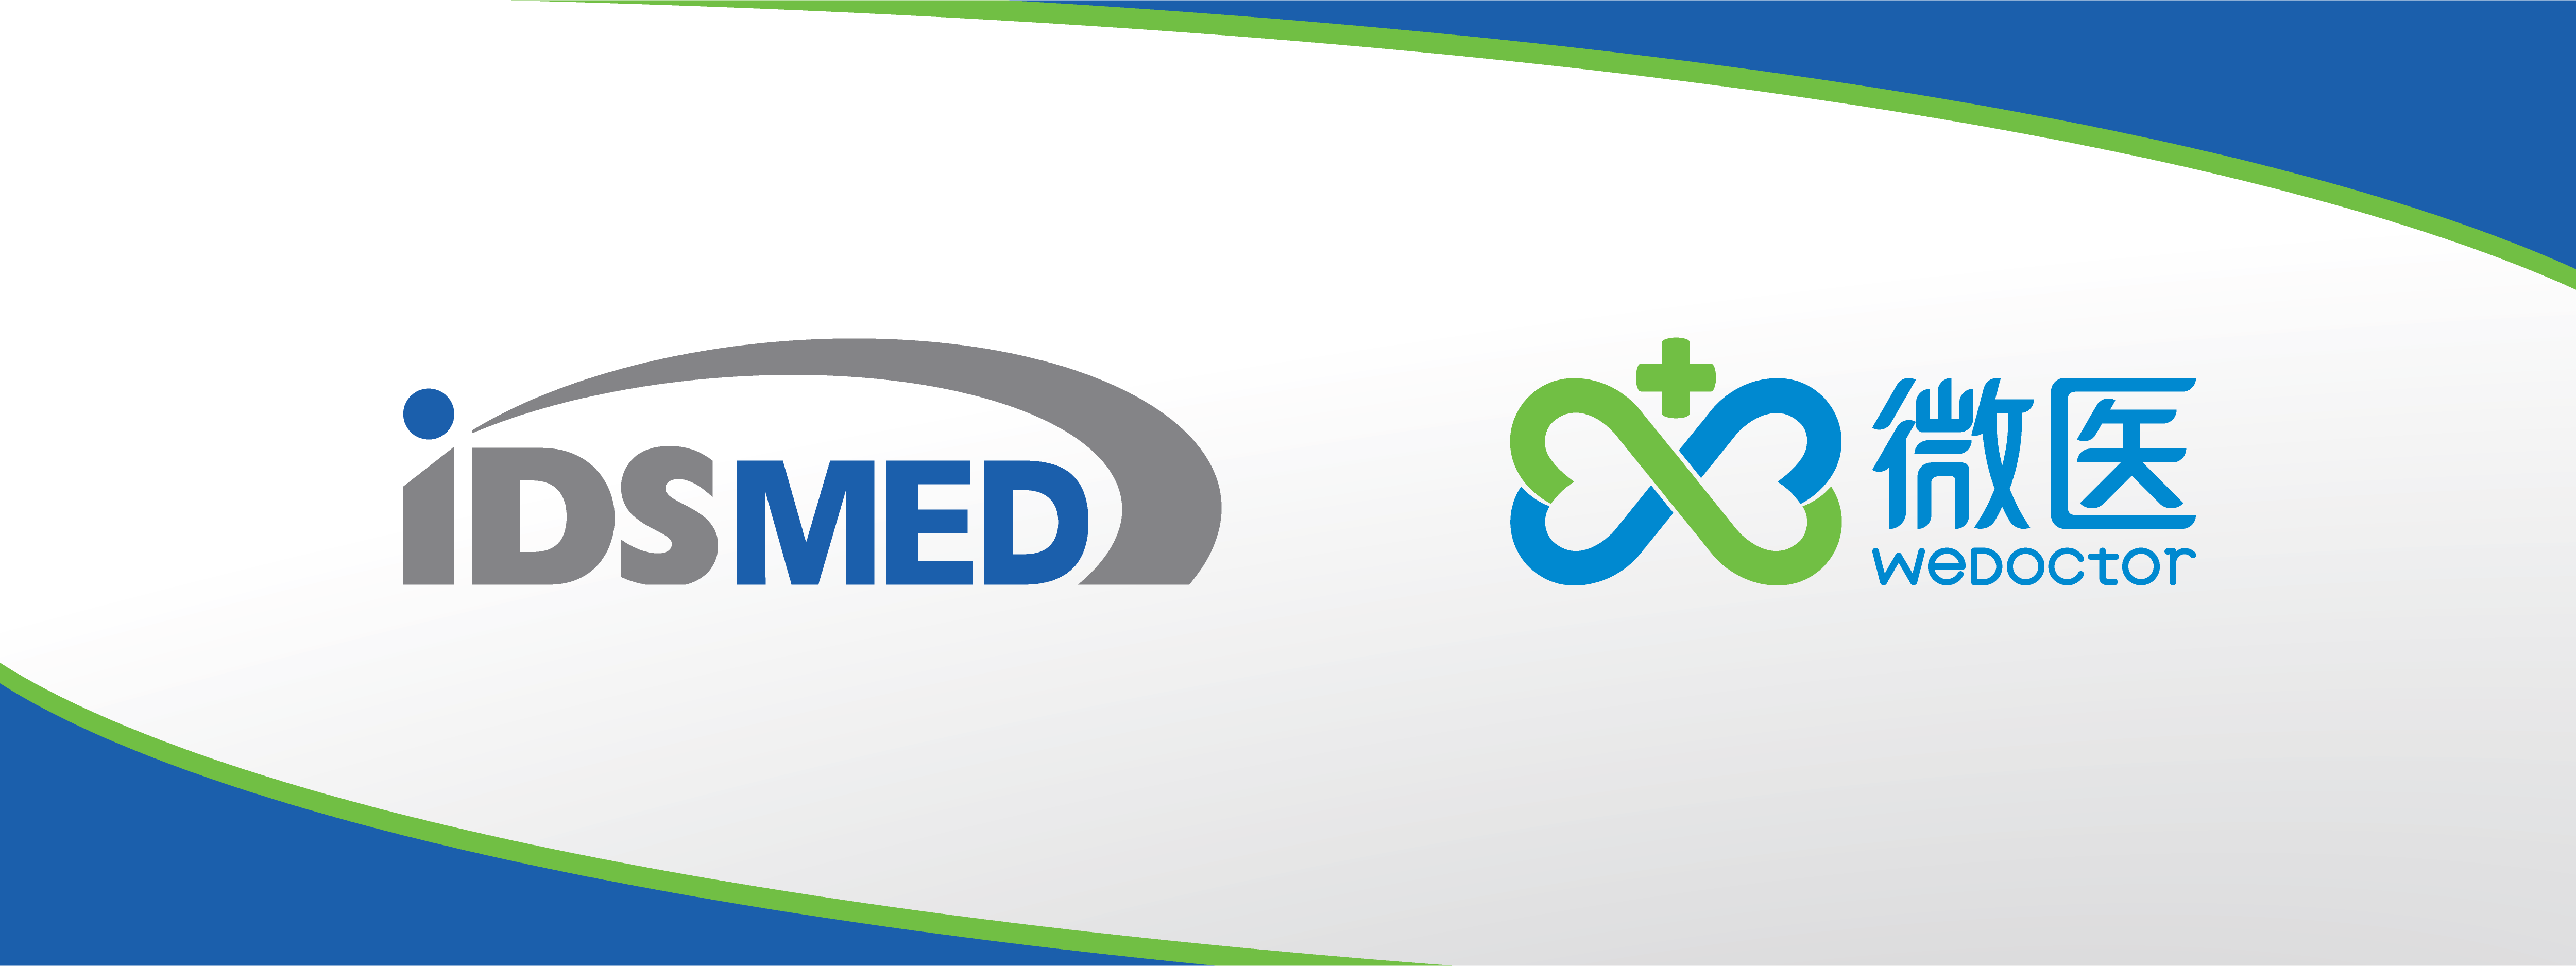 Idsmed And Wedoctor Form China S First Smart Medical Supply Chain